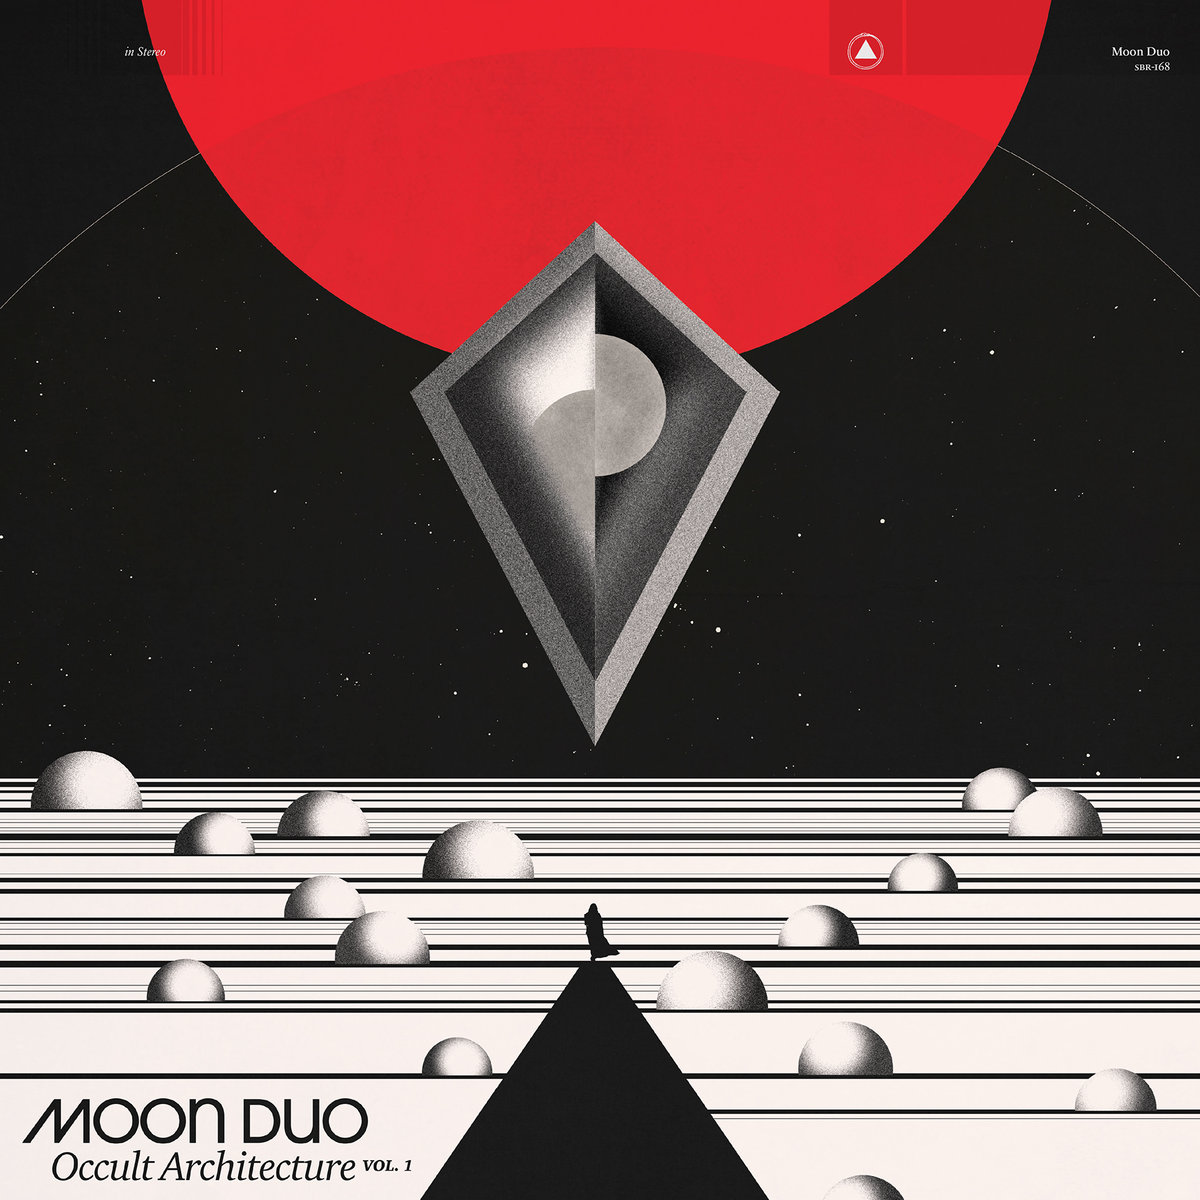 Moon Duo – OCCULT ARCHITECTURE VOL. 1; VÖ: 3.02.2017